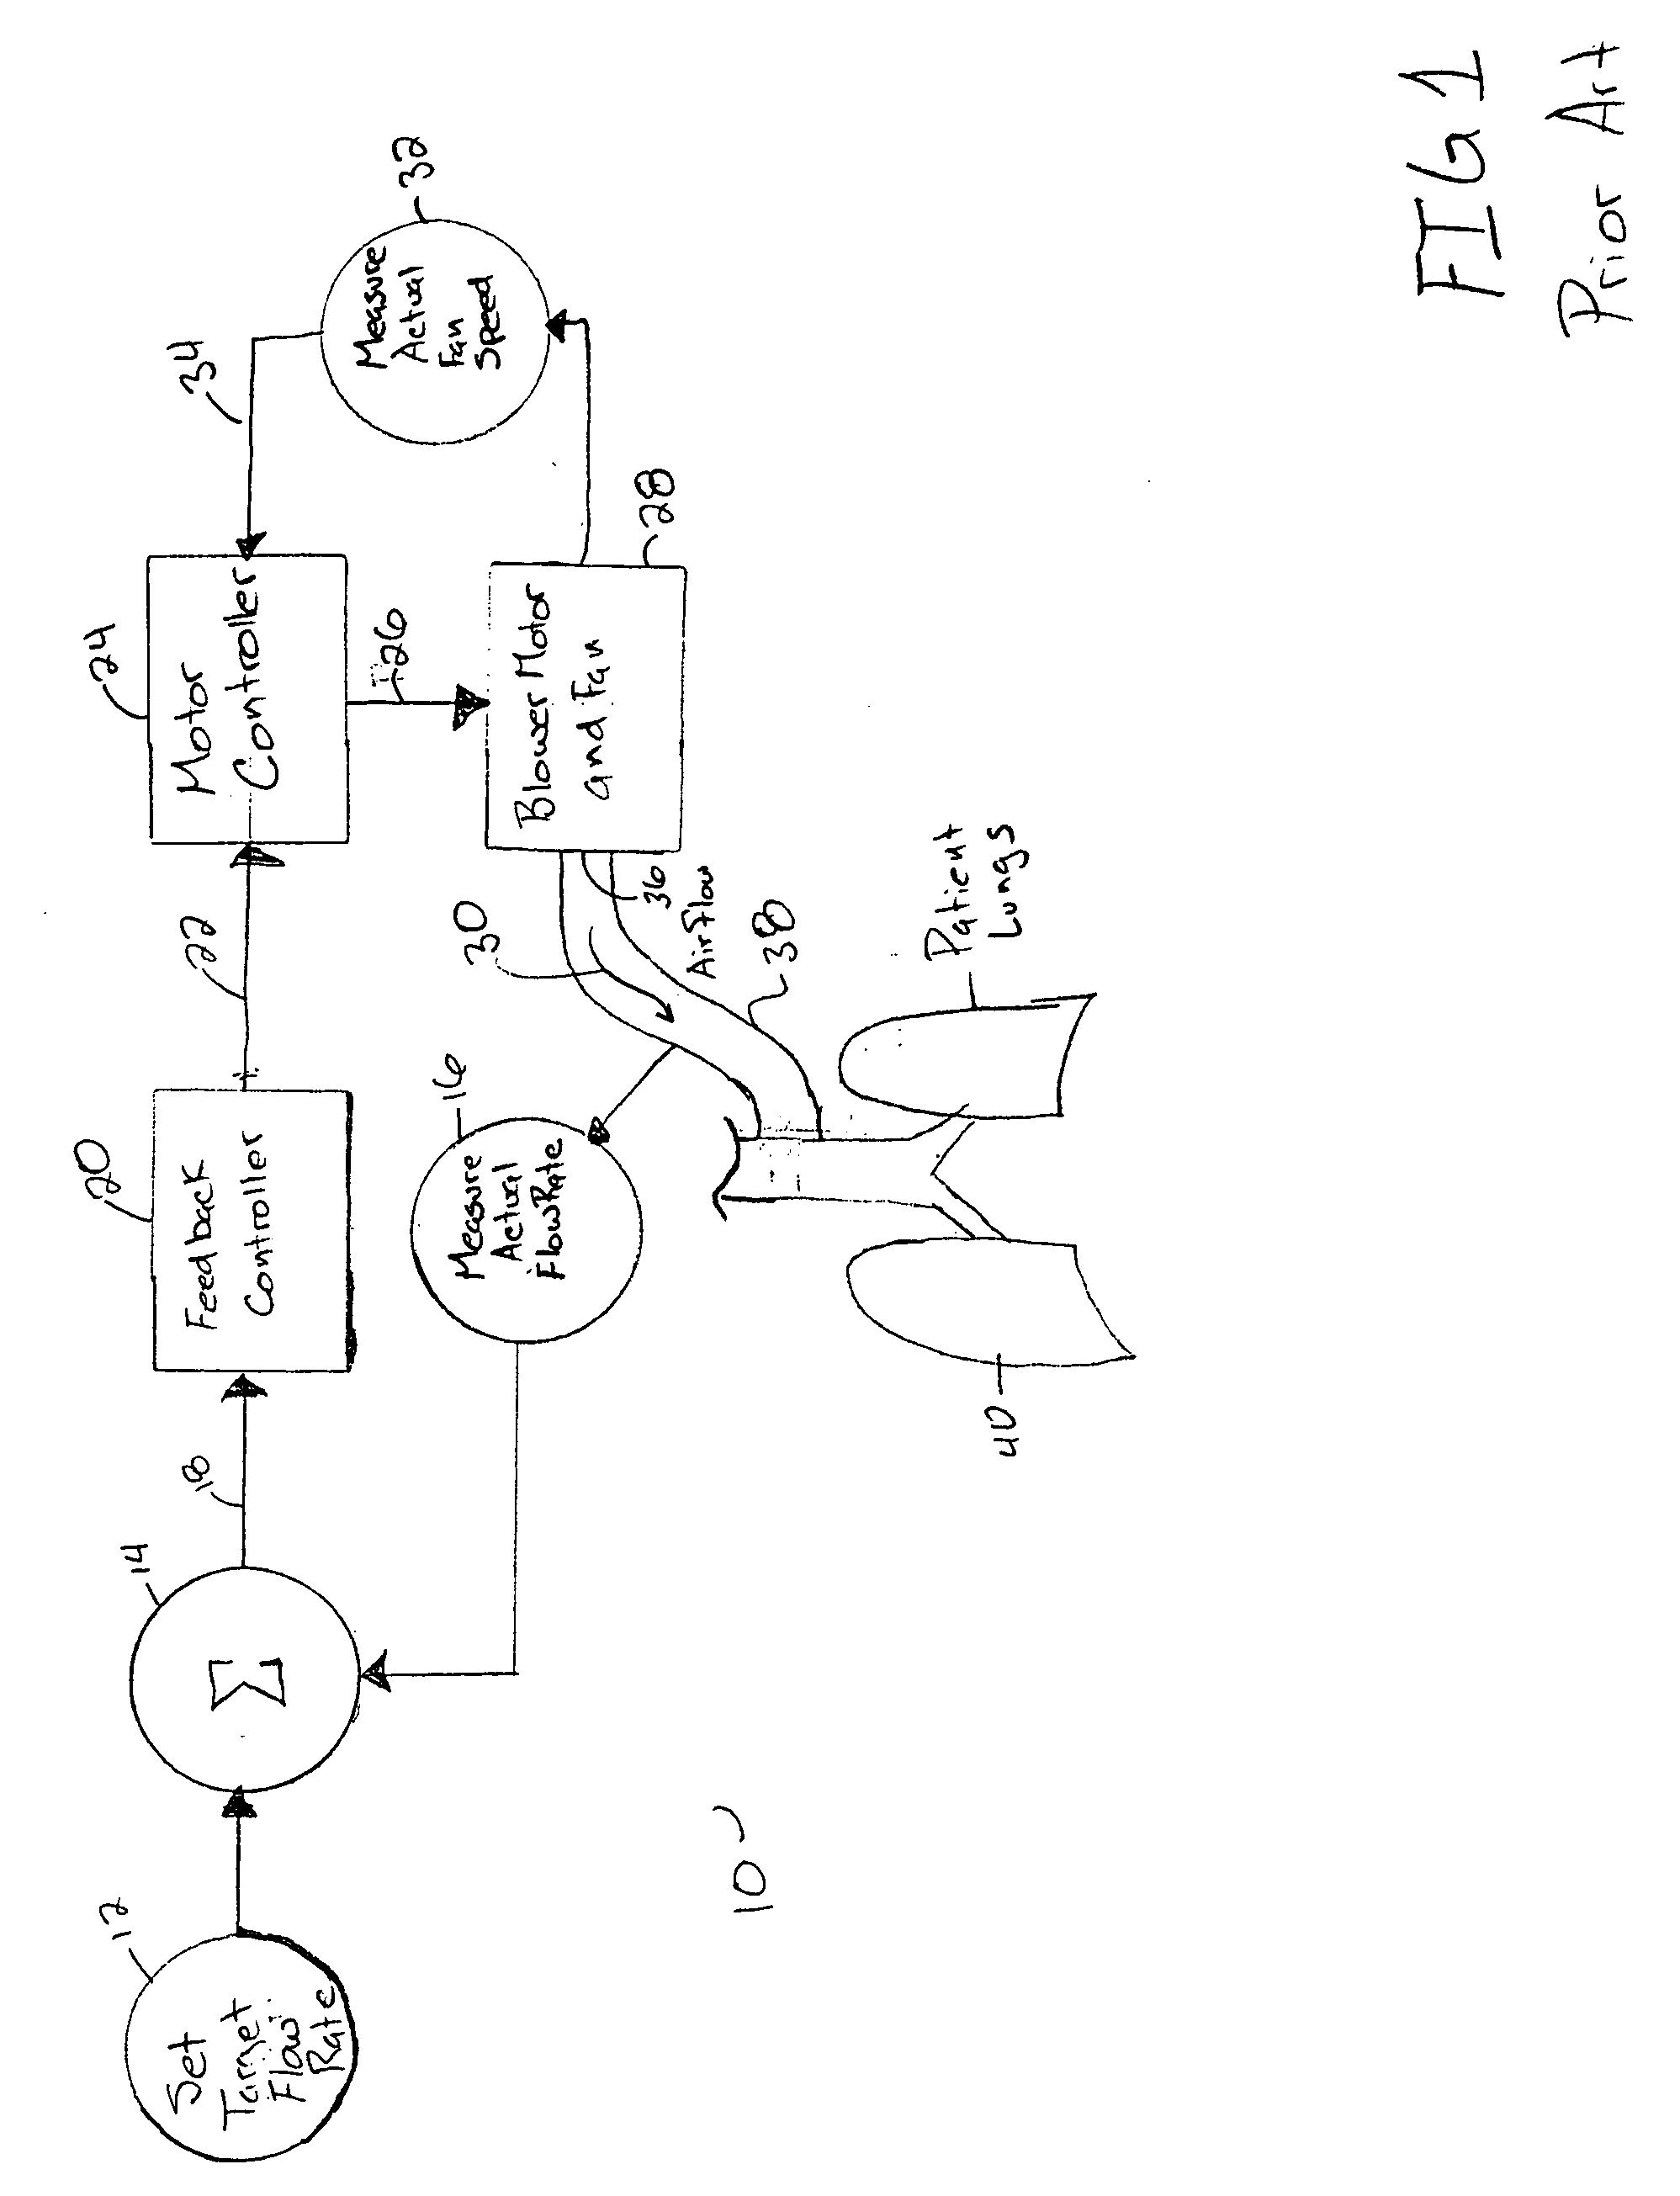 Gas flow control method in a blower based ventilation system